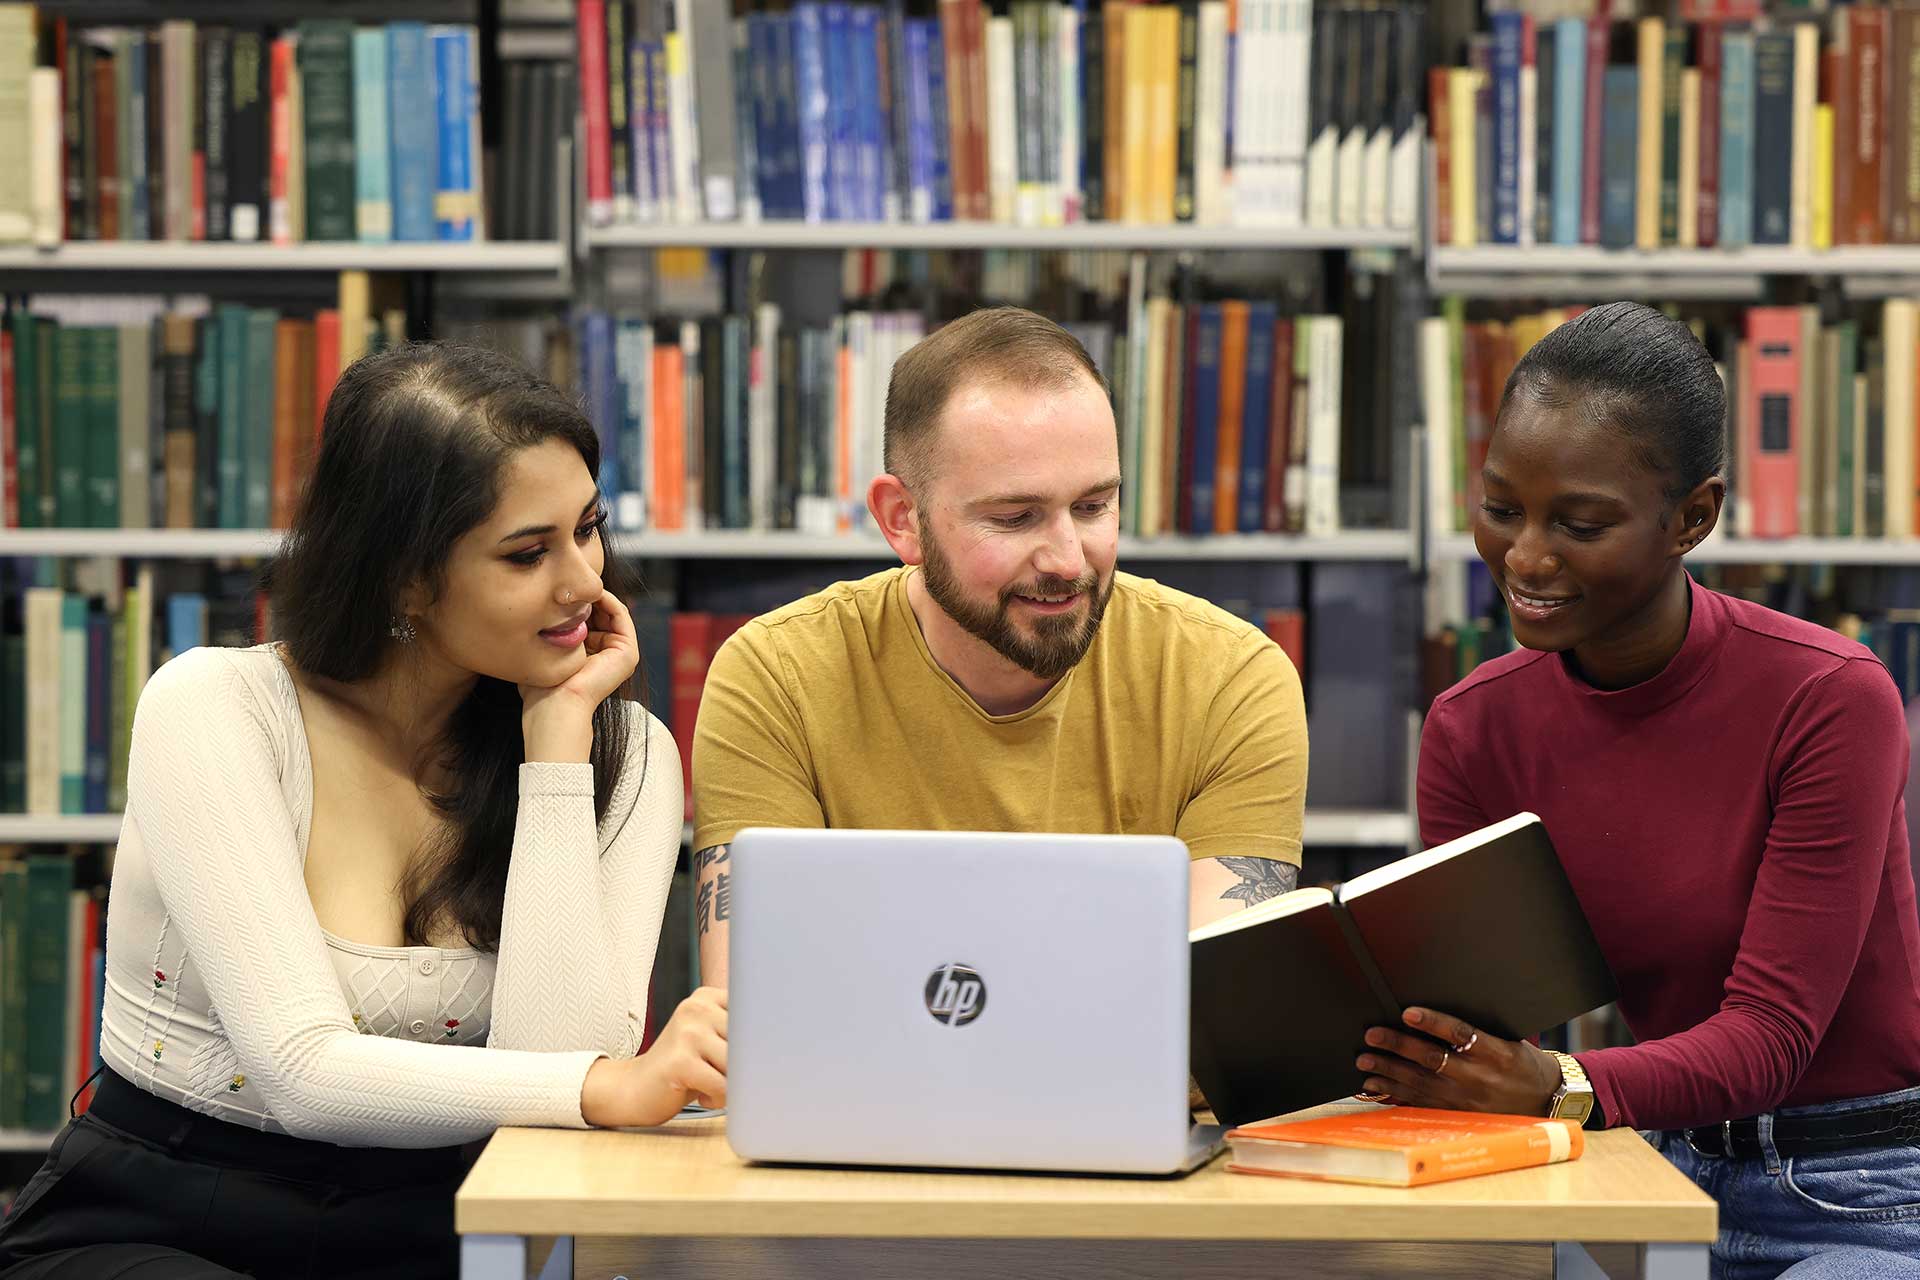 Three students studying in the library together.